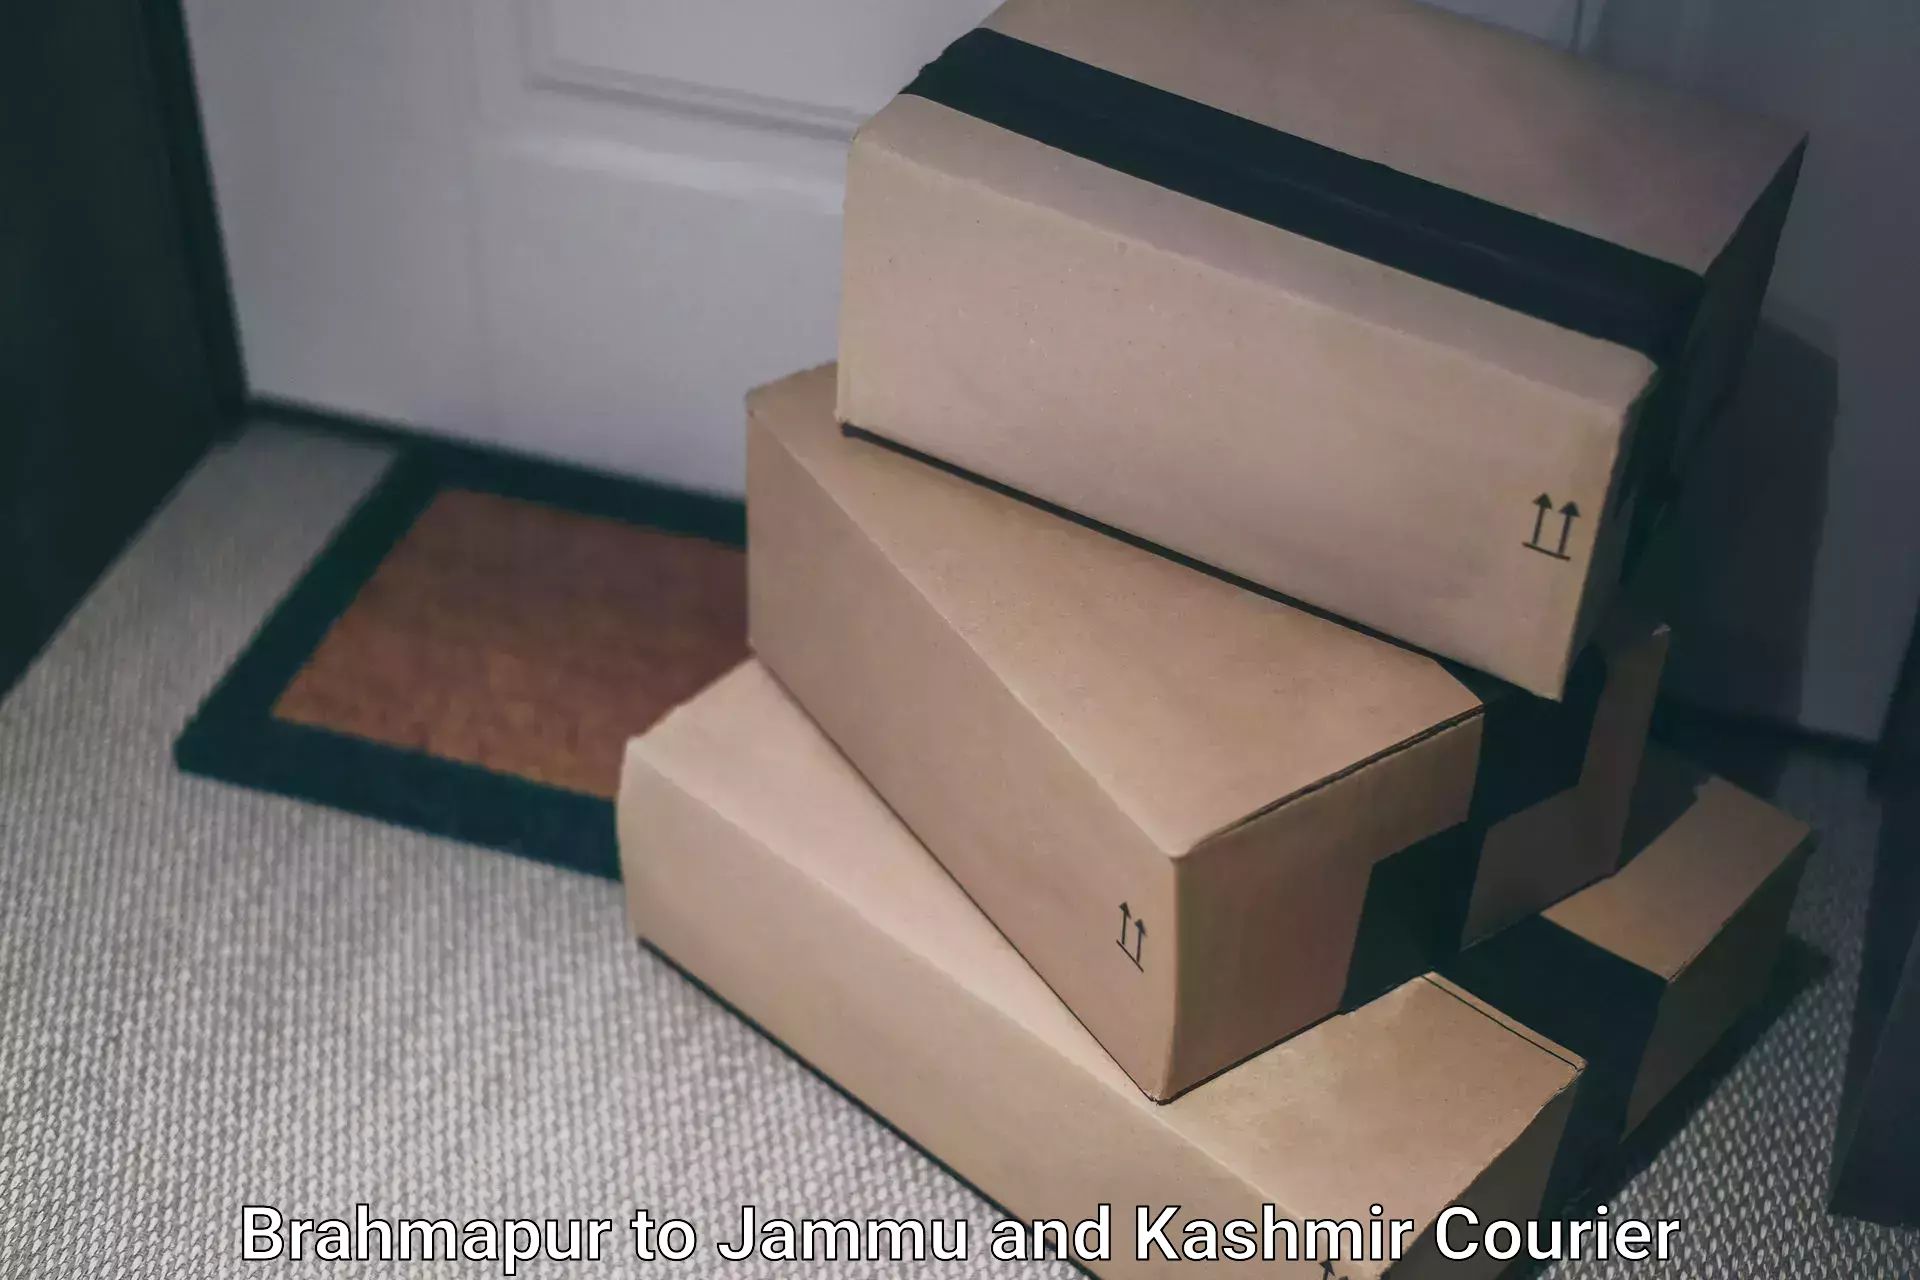 State-of-the-art courier technology Brahmapur to Jammu and Kashmir